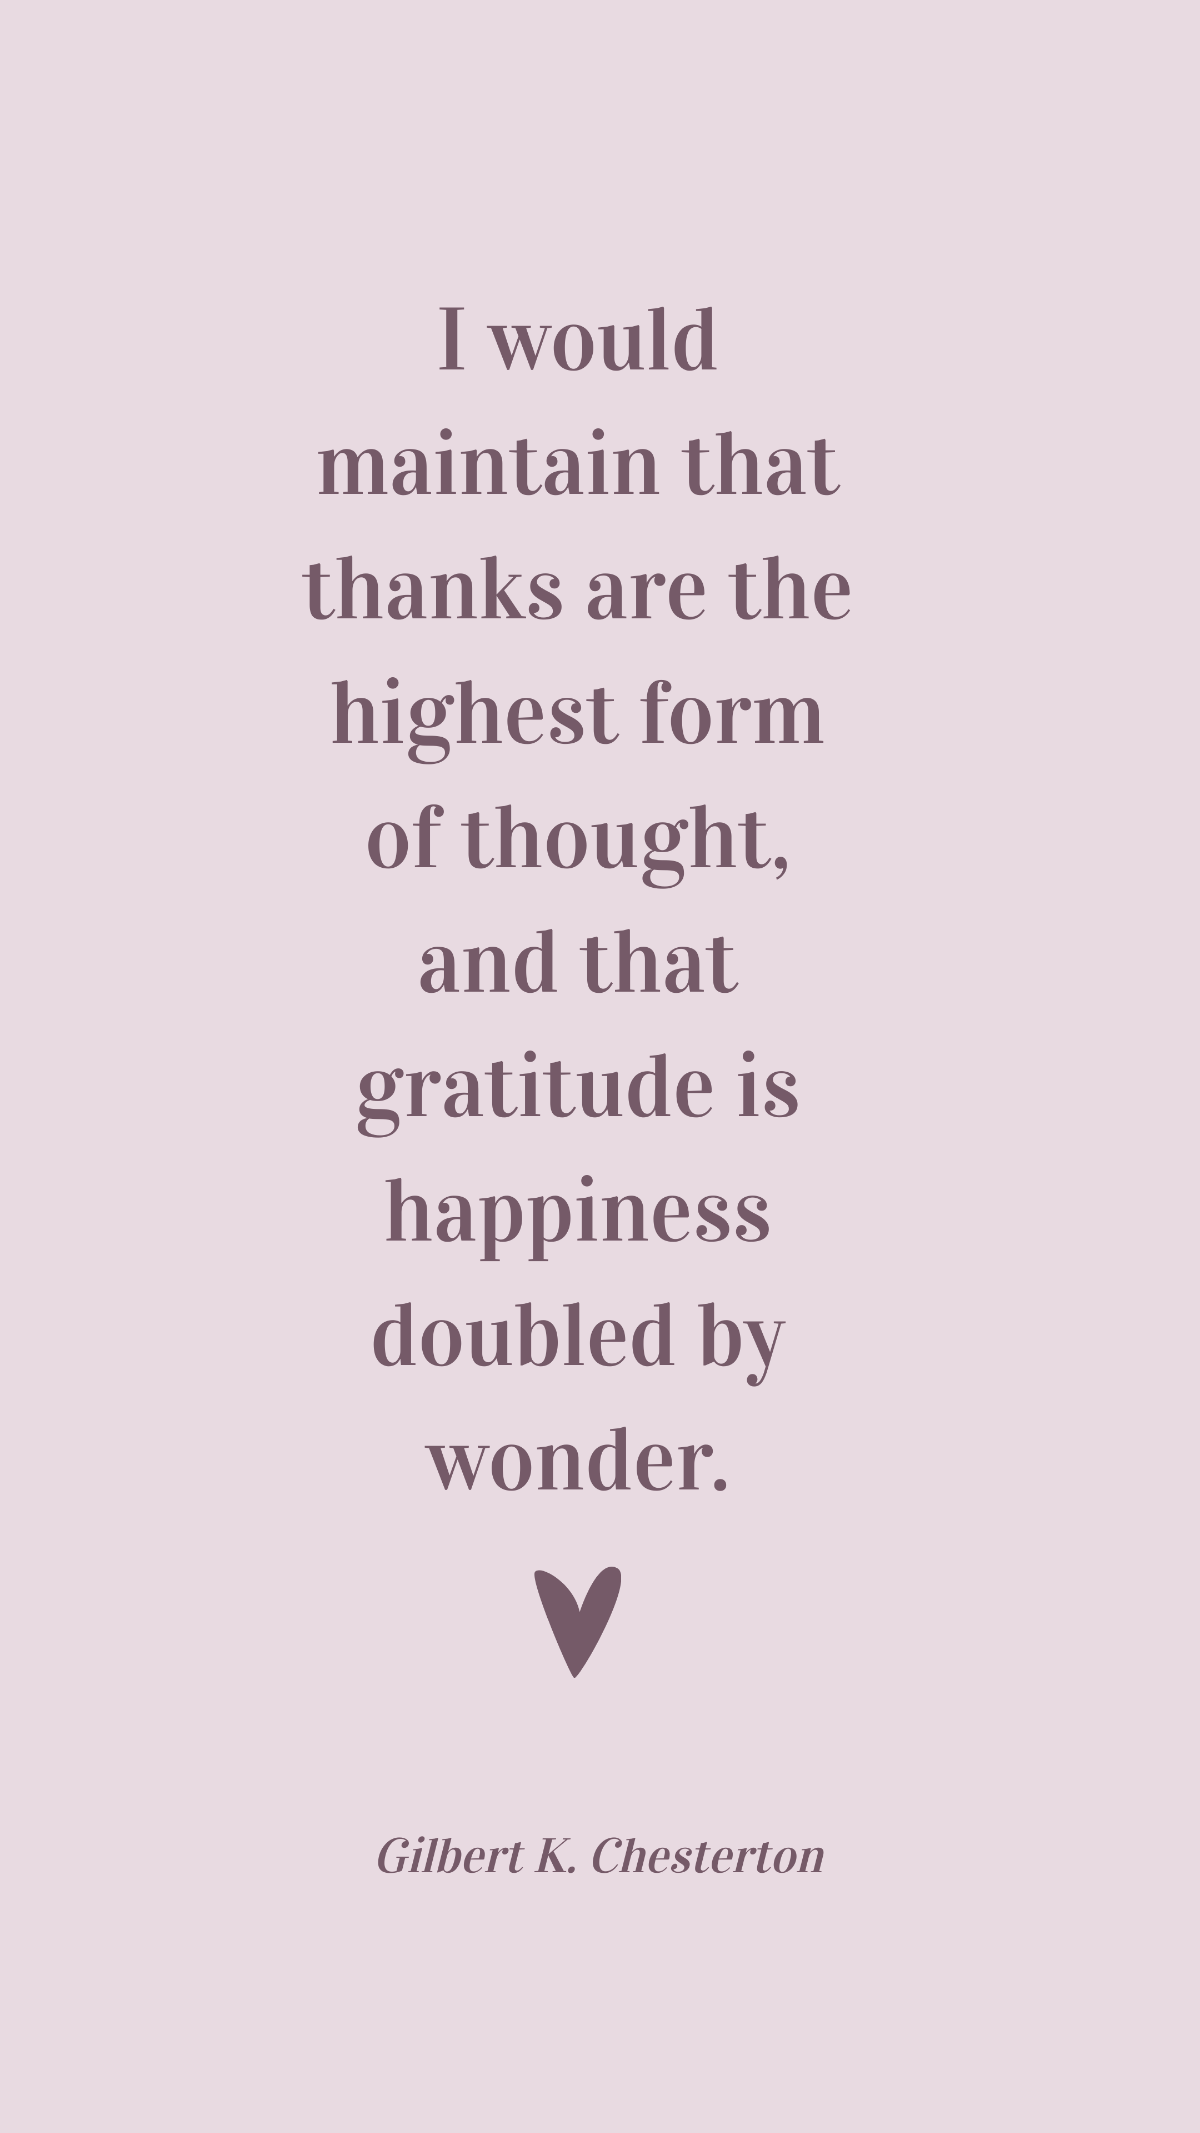 Gilbert K. Chesterton - I would maintain that thanks are the highest form of thought, and that gratitude is happiness doubled by wonder. Template